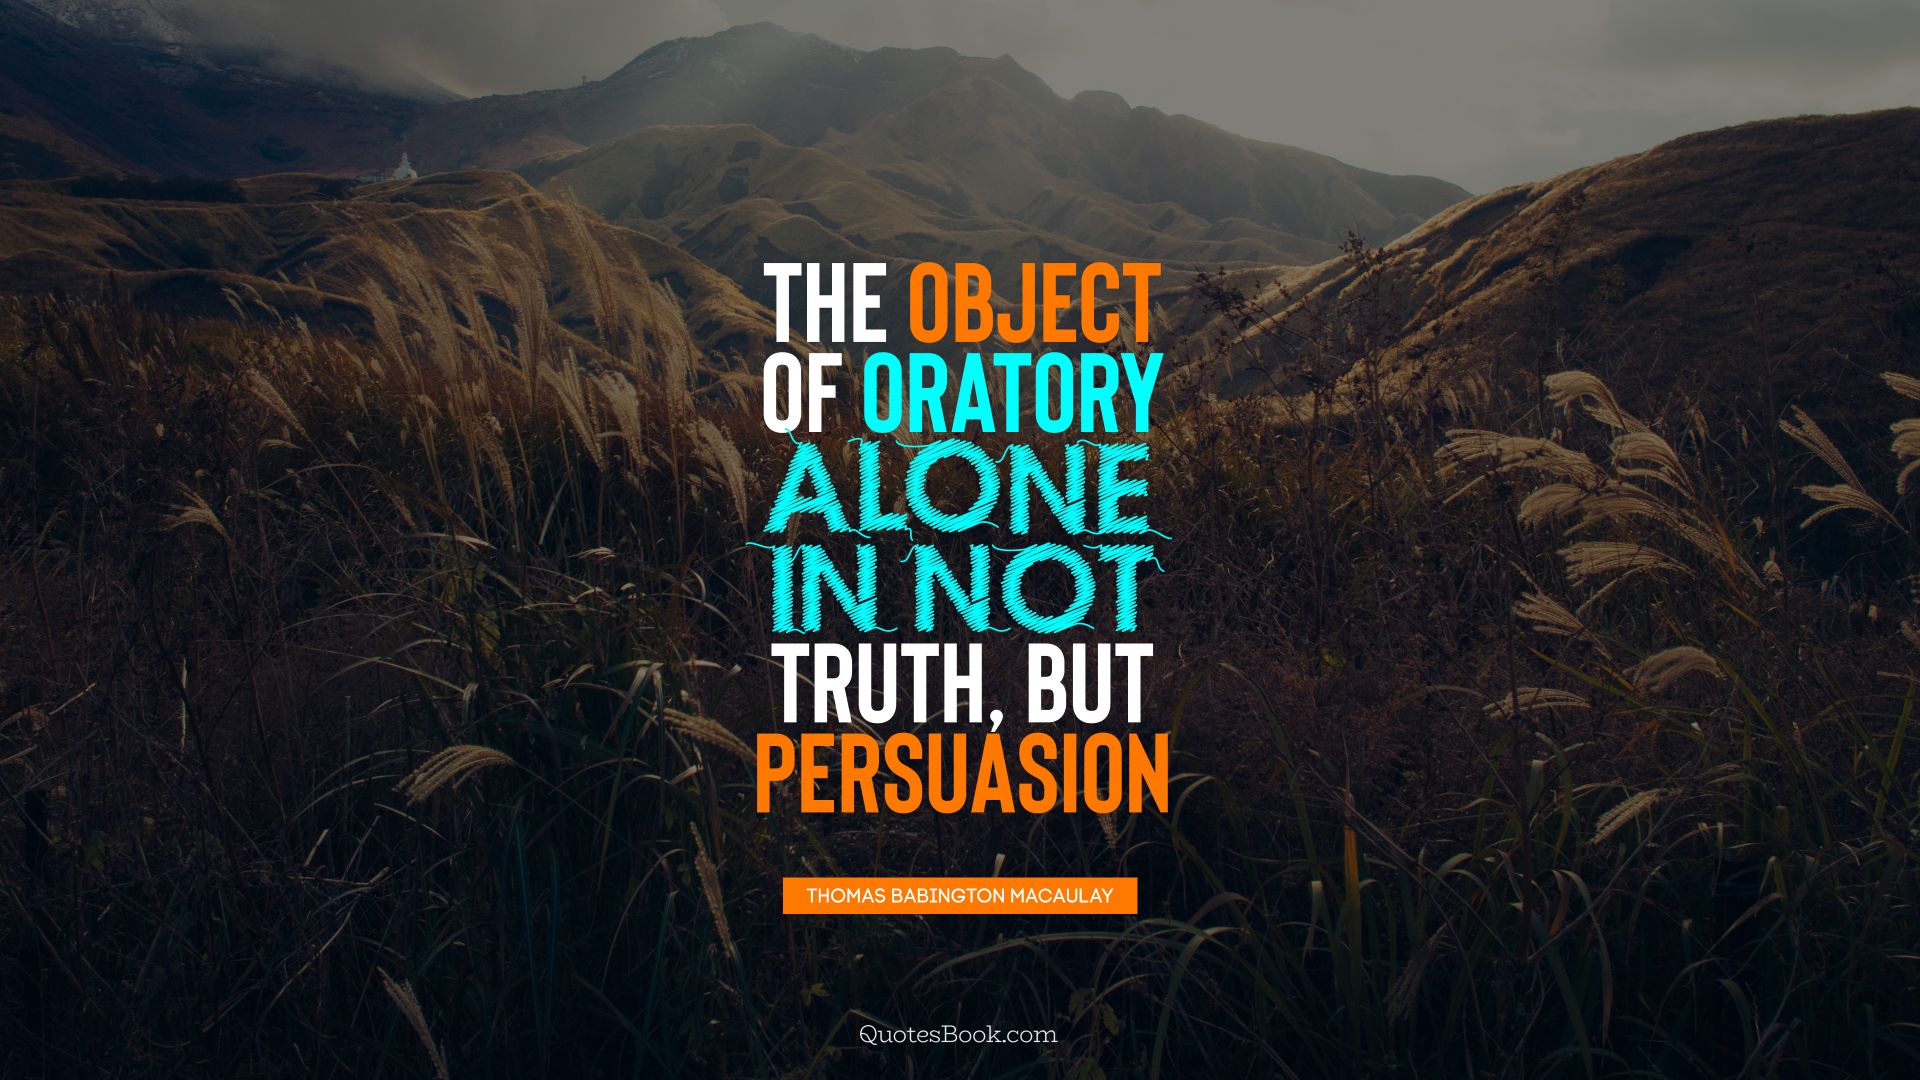 The object of oratory alone in not truth, but persuasion. - Quote by Thomas Babington Macaulay